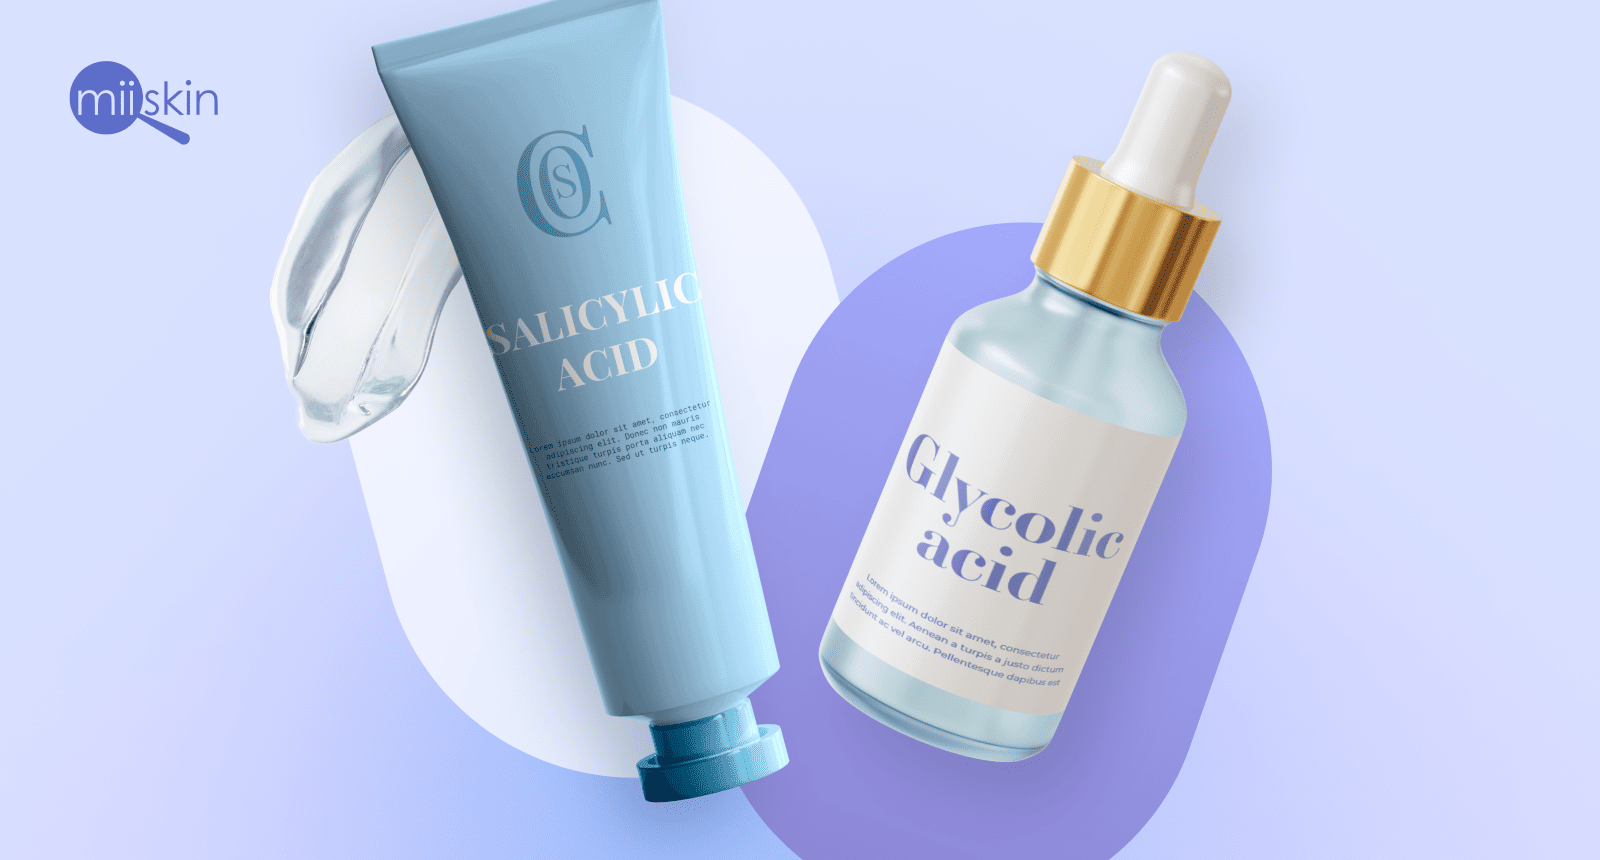 Glycolic Acid vs. Salicylic Acid: Which Is Better for You?